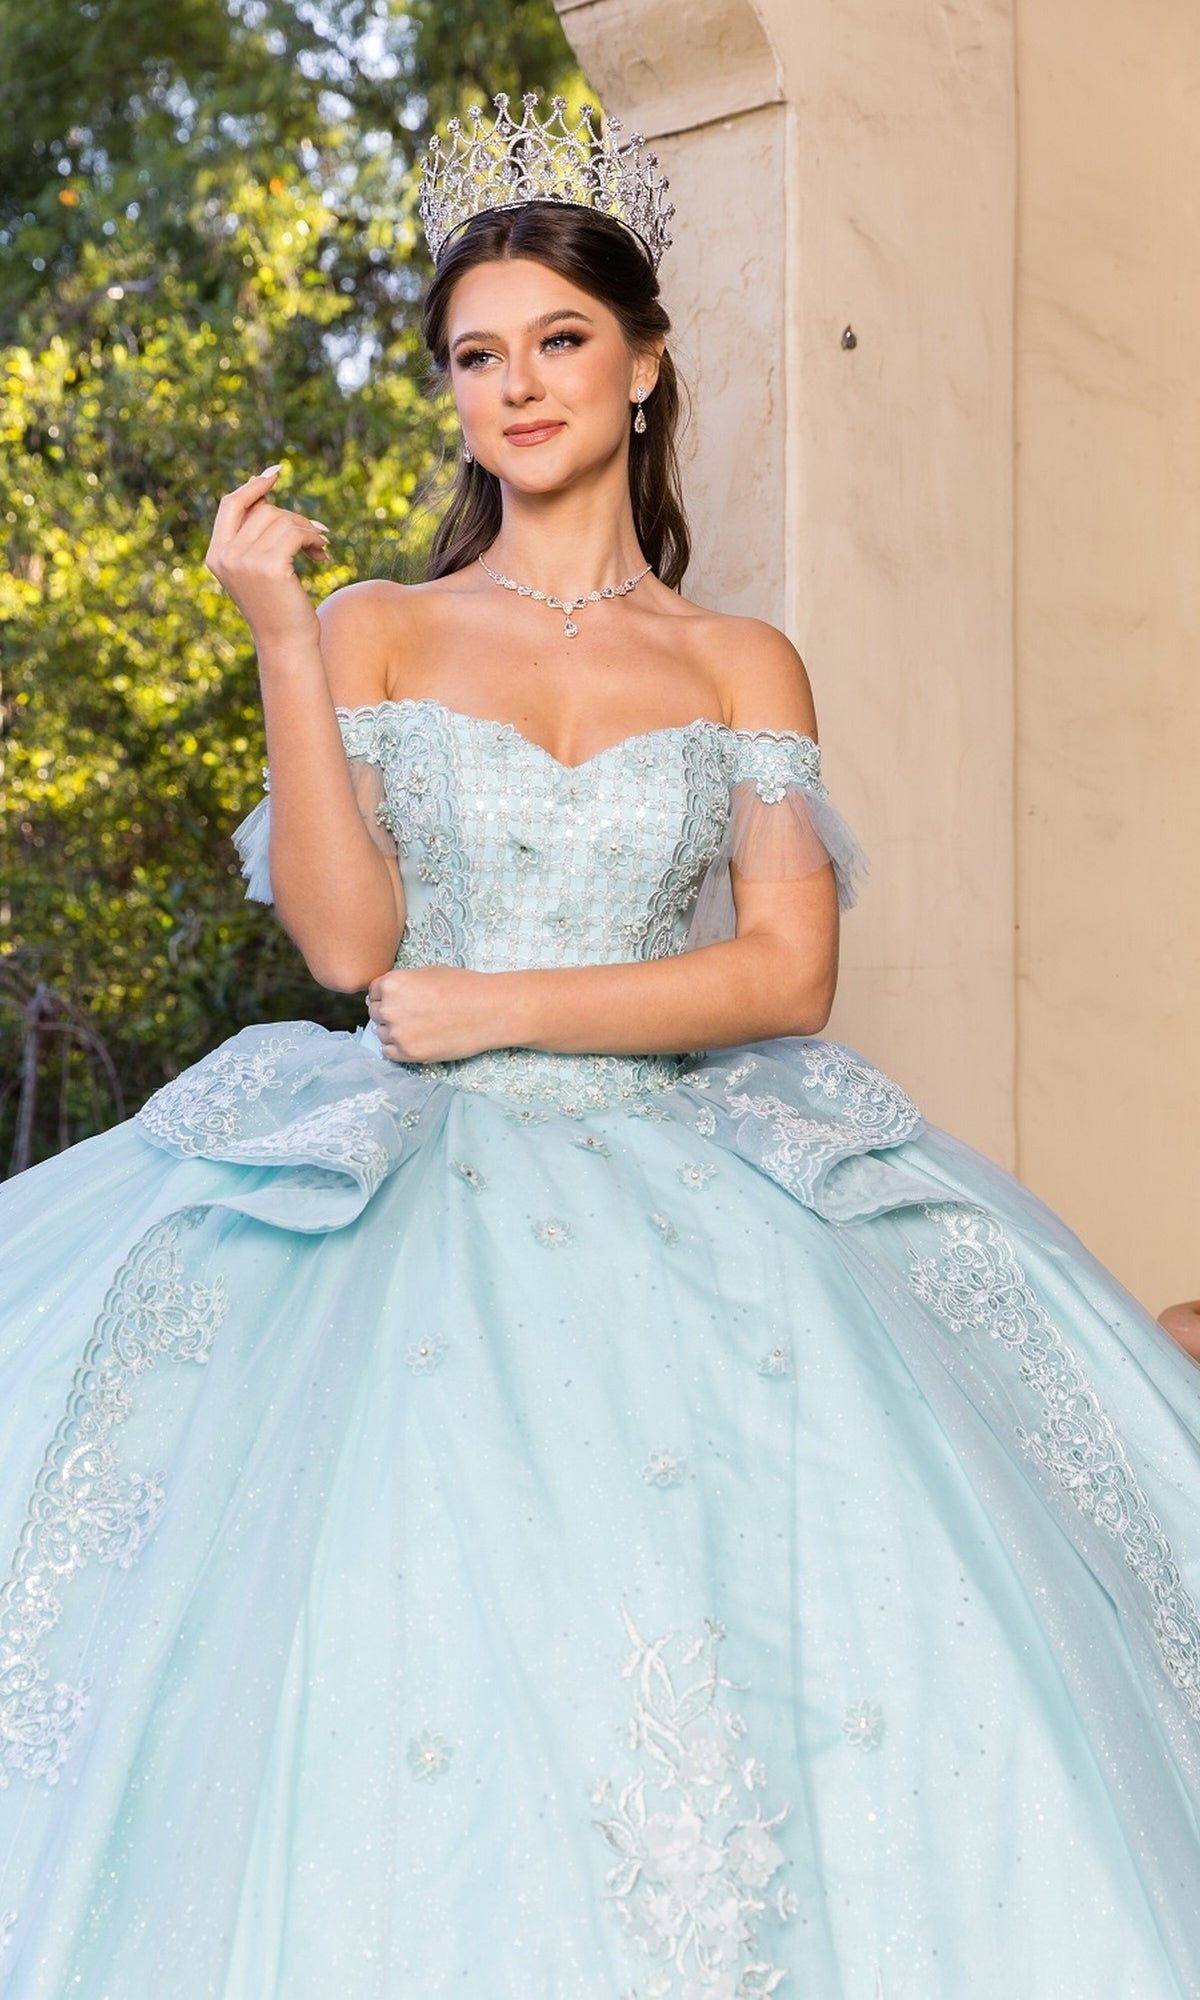 Quinceanera Dress 8055J By Cinderella Couture